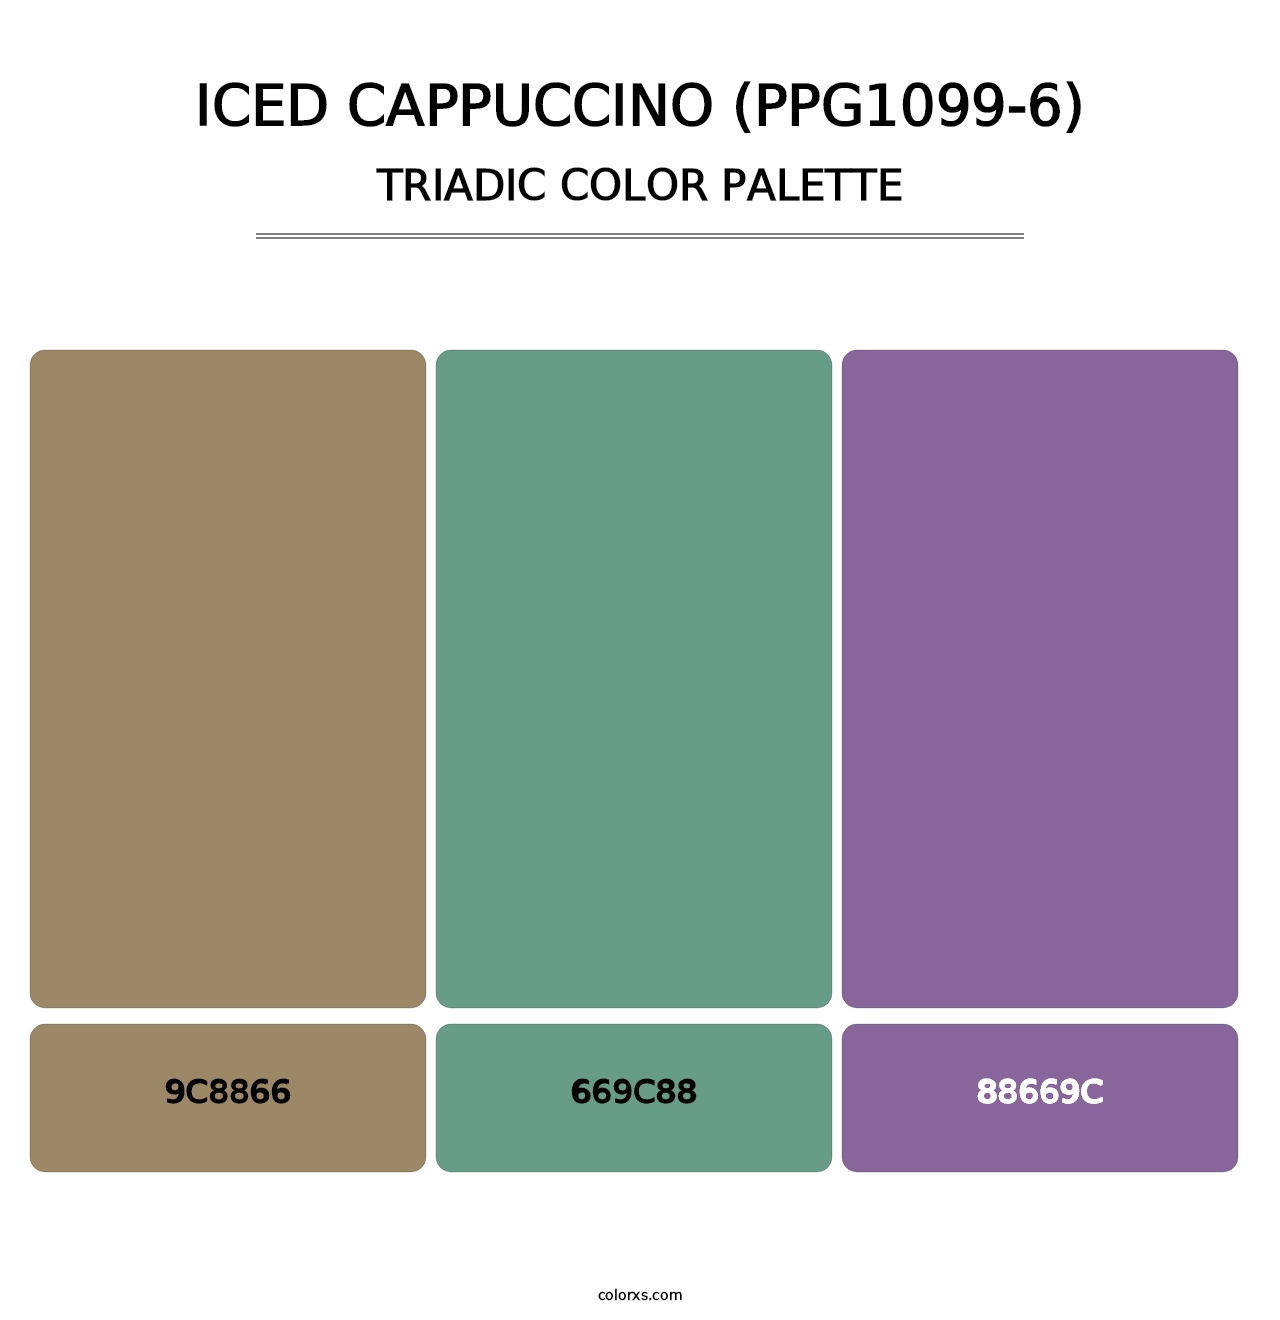 Iced Cappuccino (PPG1099-6) - Triadic Color Palette